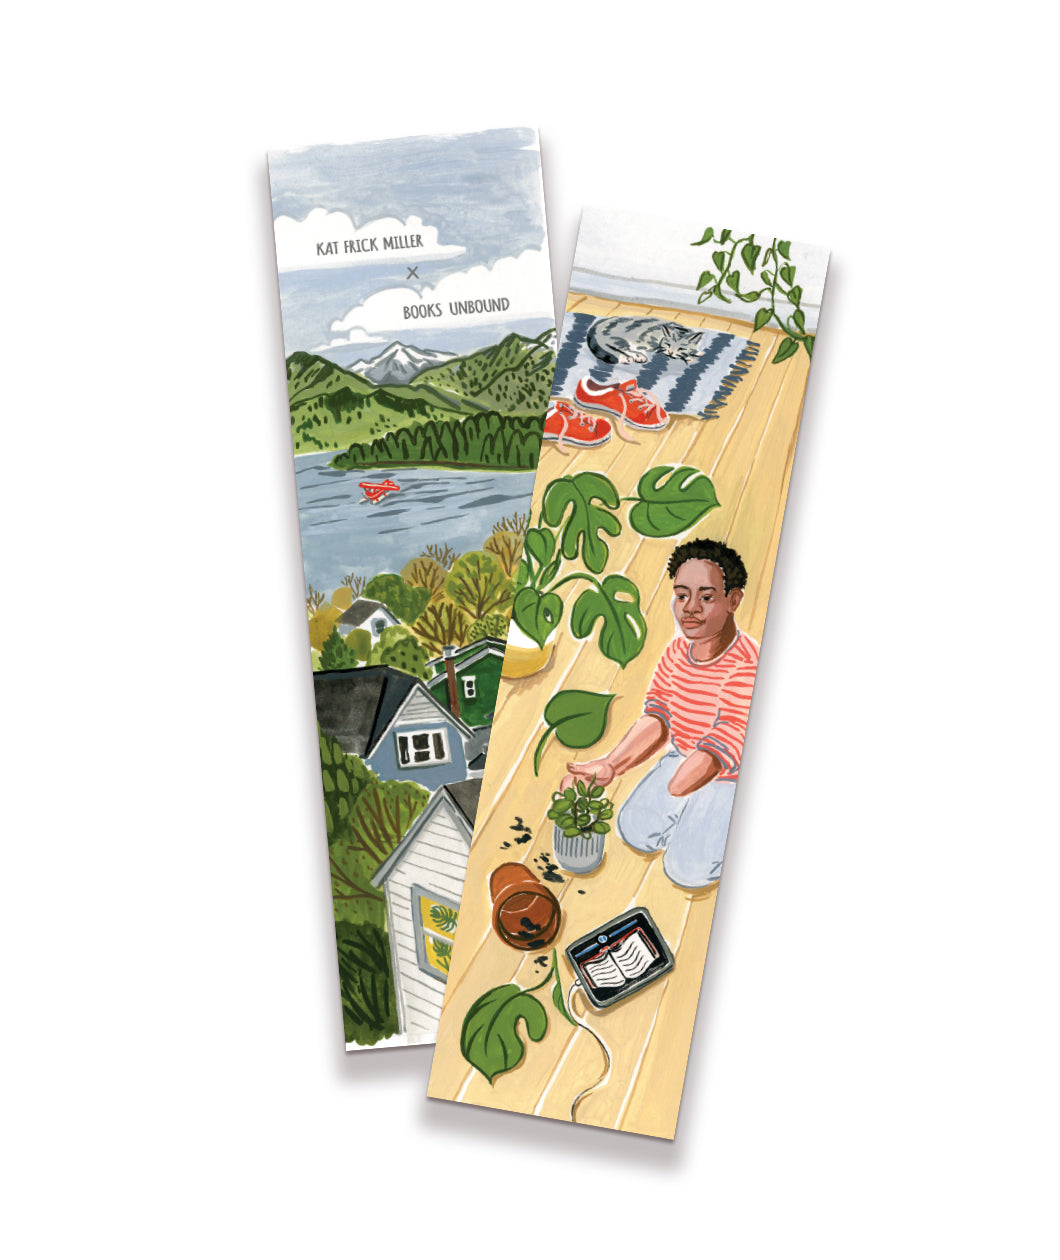 A set of 2 bookmarks with artwork of a painterly style, depicting a cozy living room scene and a lakeview scene.